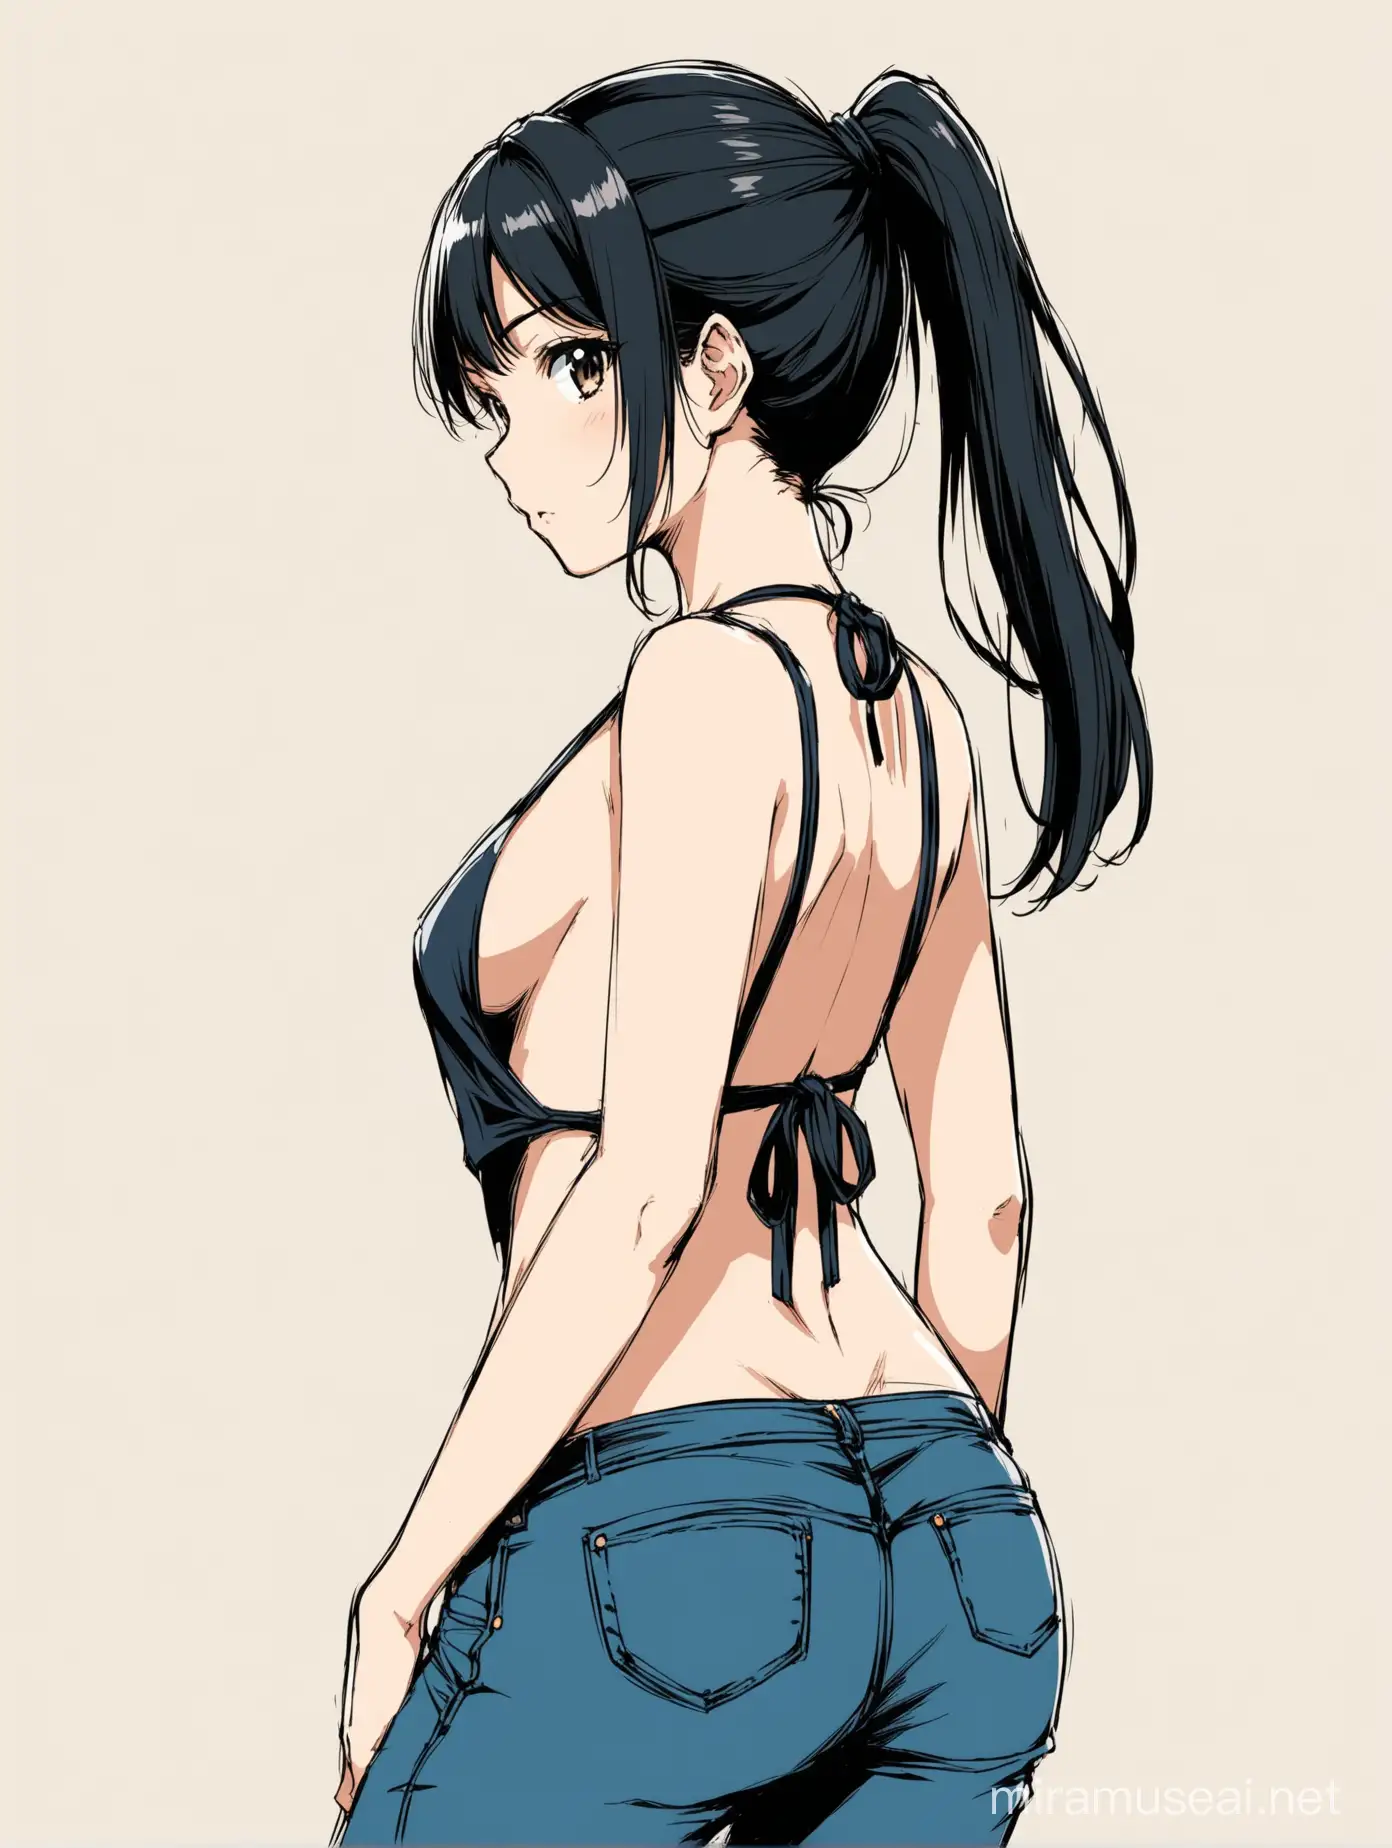 Color book page of A woman with anime-style black hair tied up in a ponytail, wearing dark jeans and swim suit.